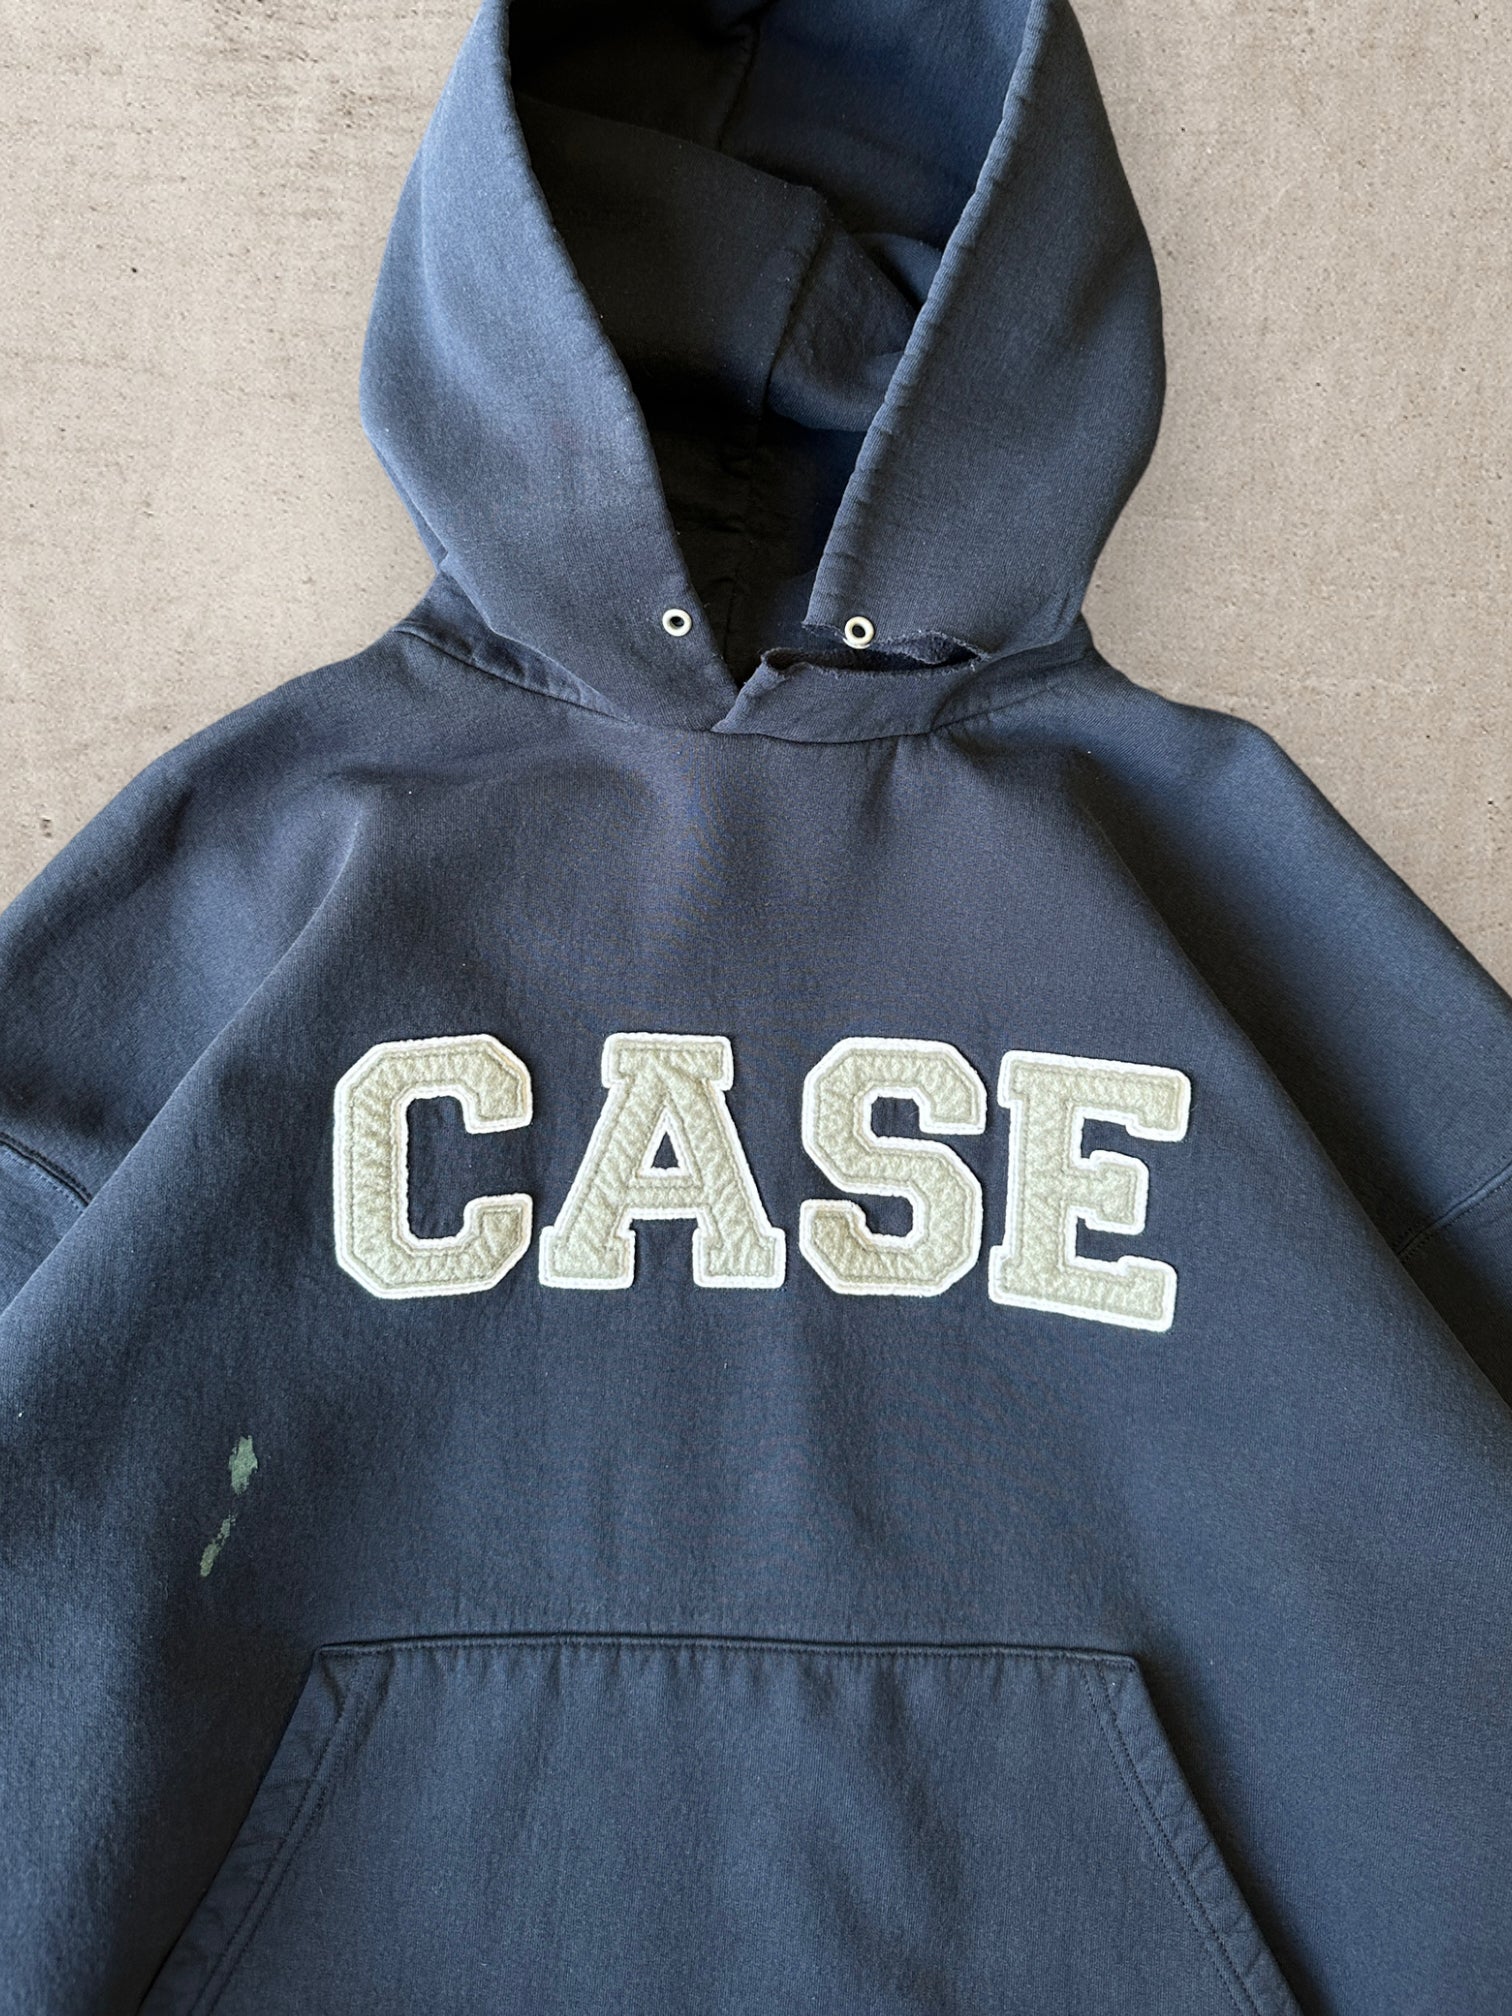 00s Champion CASE Spell Out Hoodie - XL